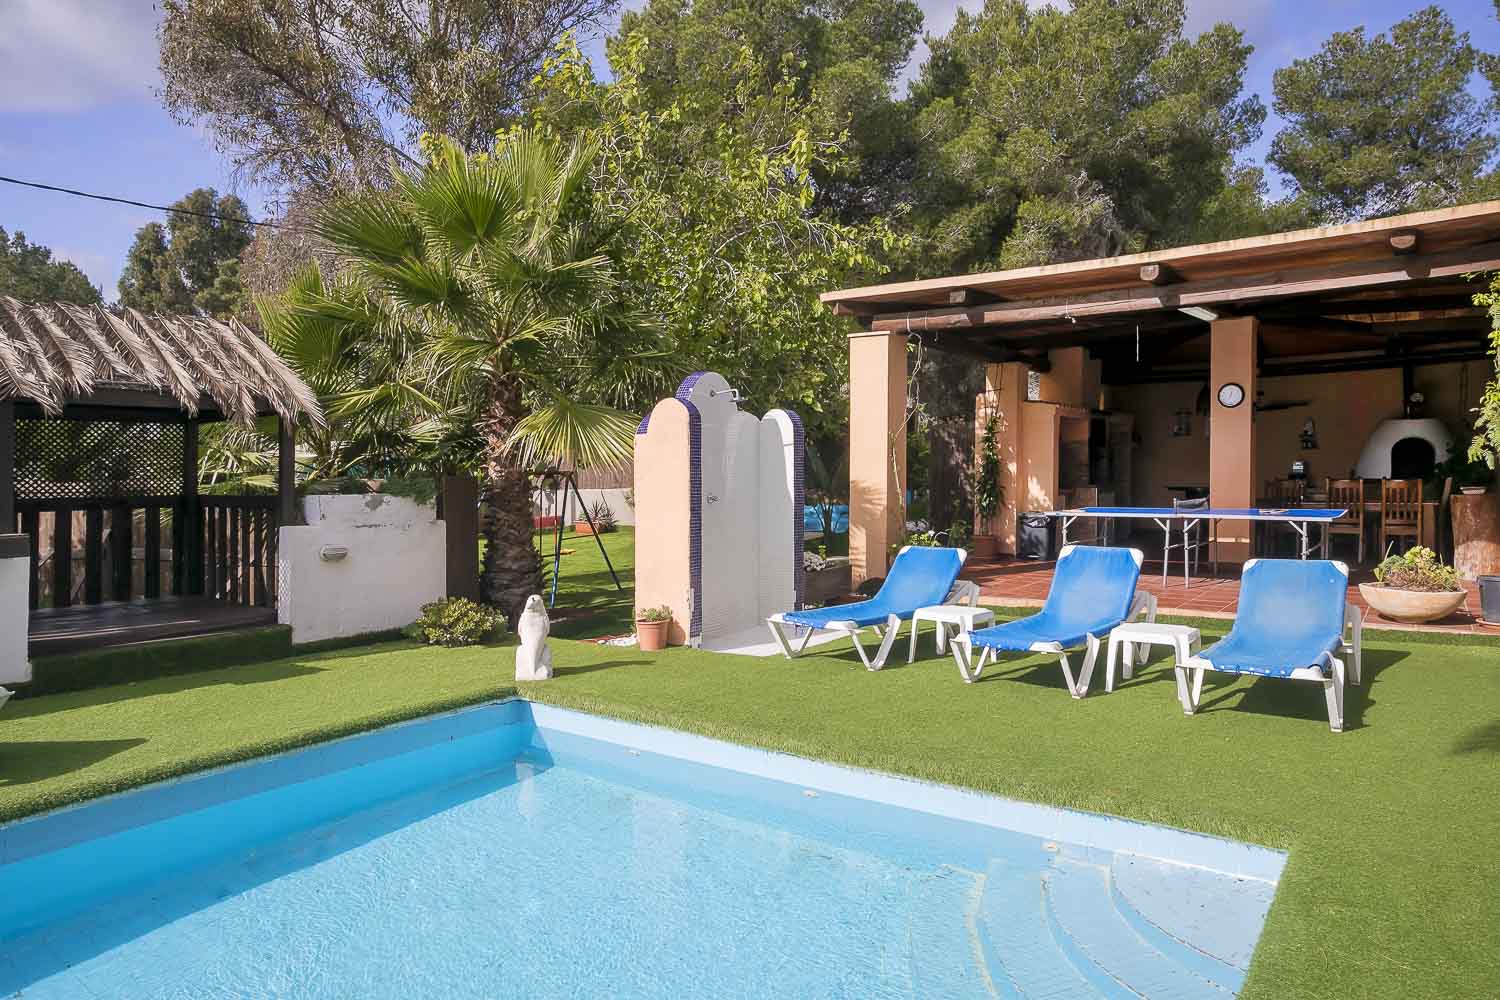 Pool zone in a rental house of Ibiza